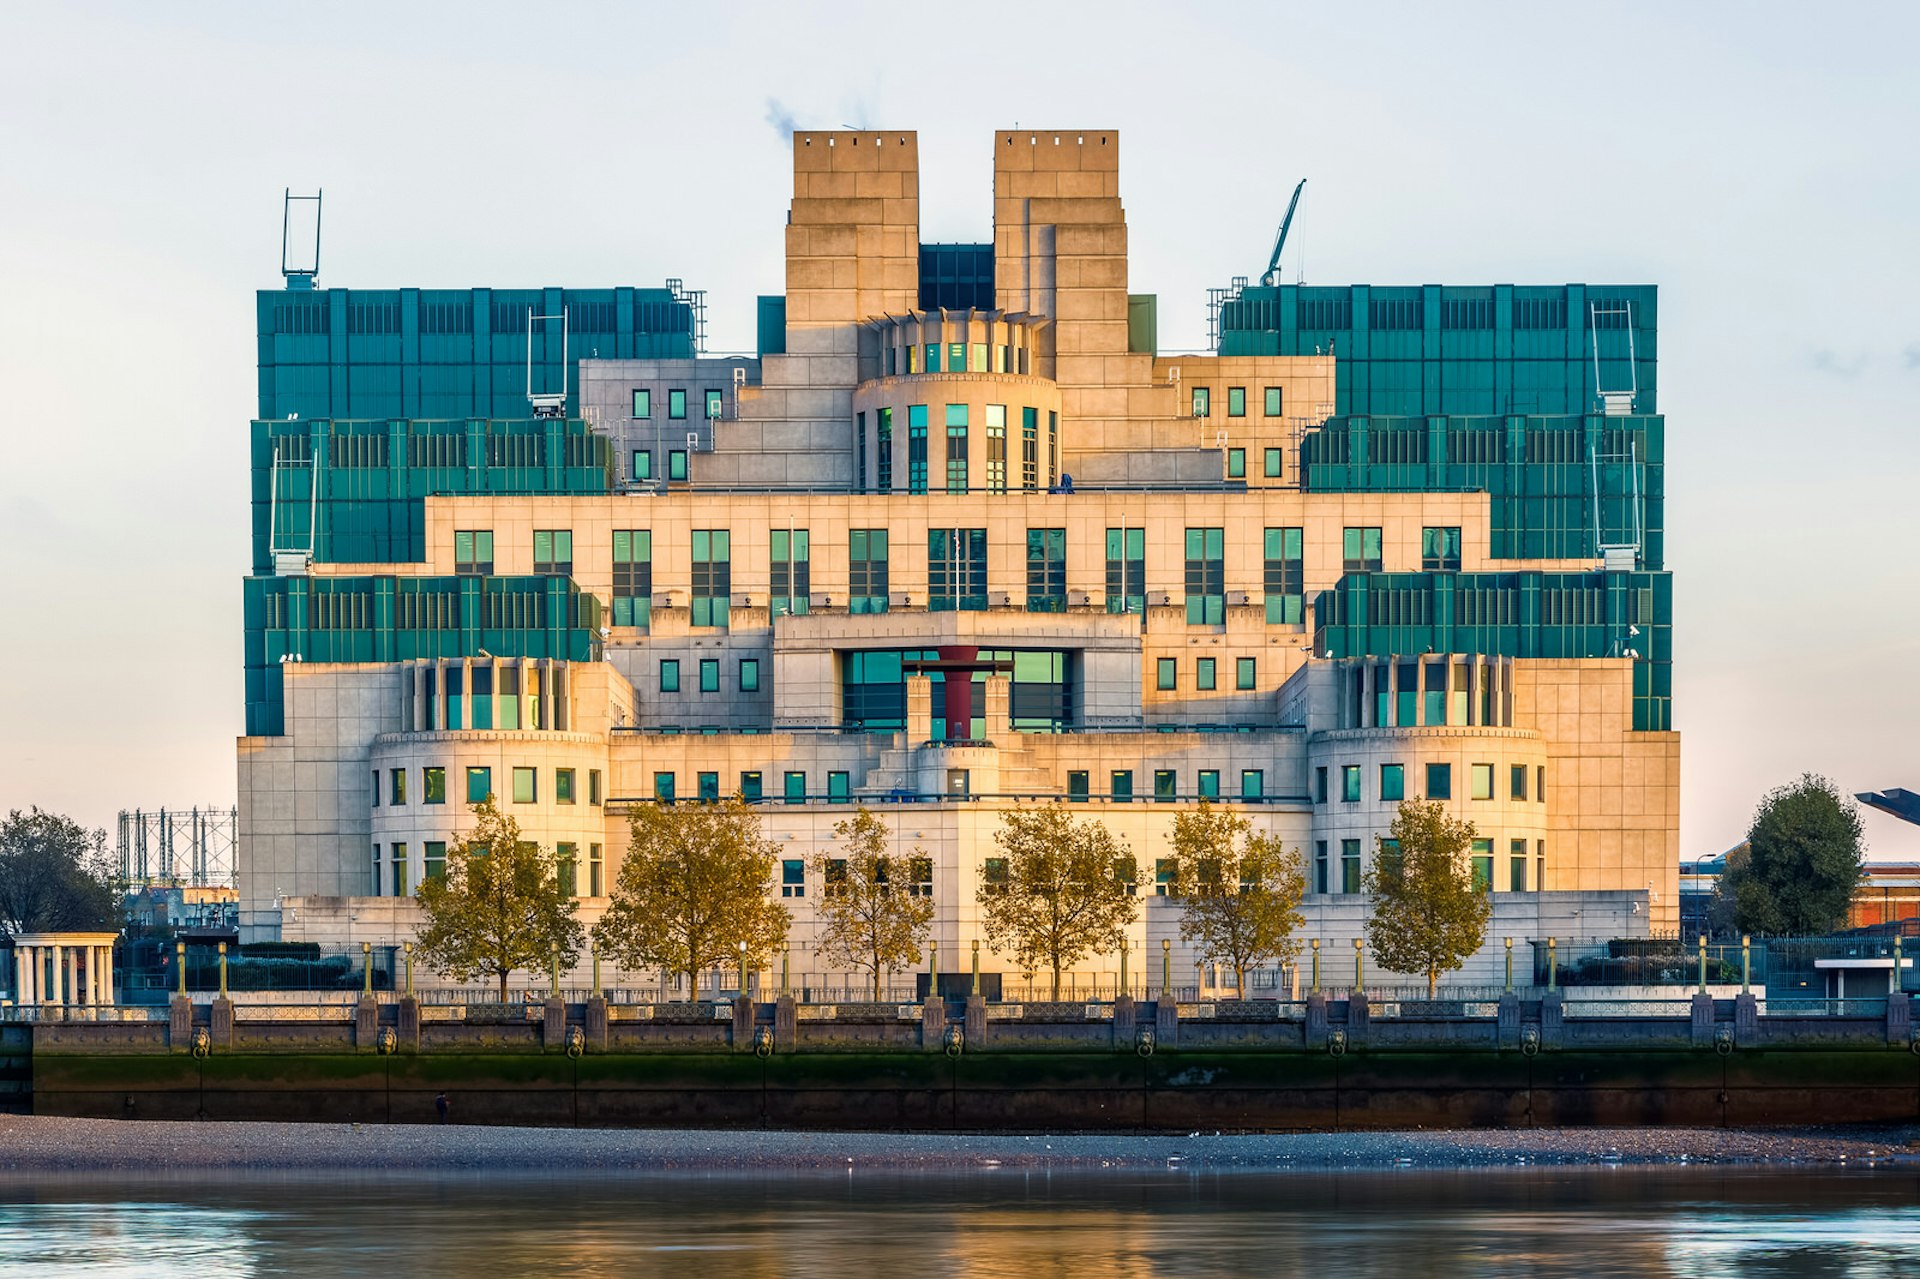 MI6 building, London © VictorHuang / Getty Images